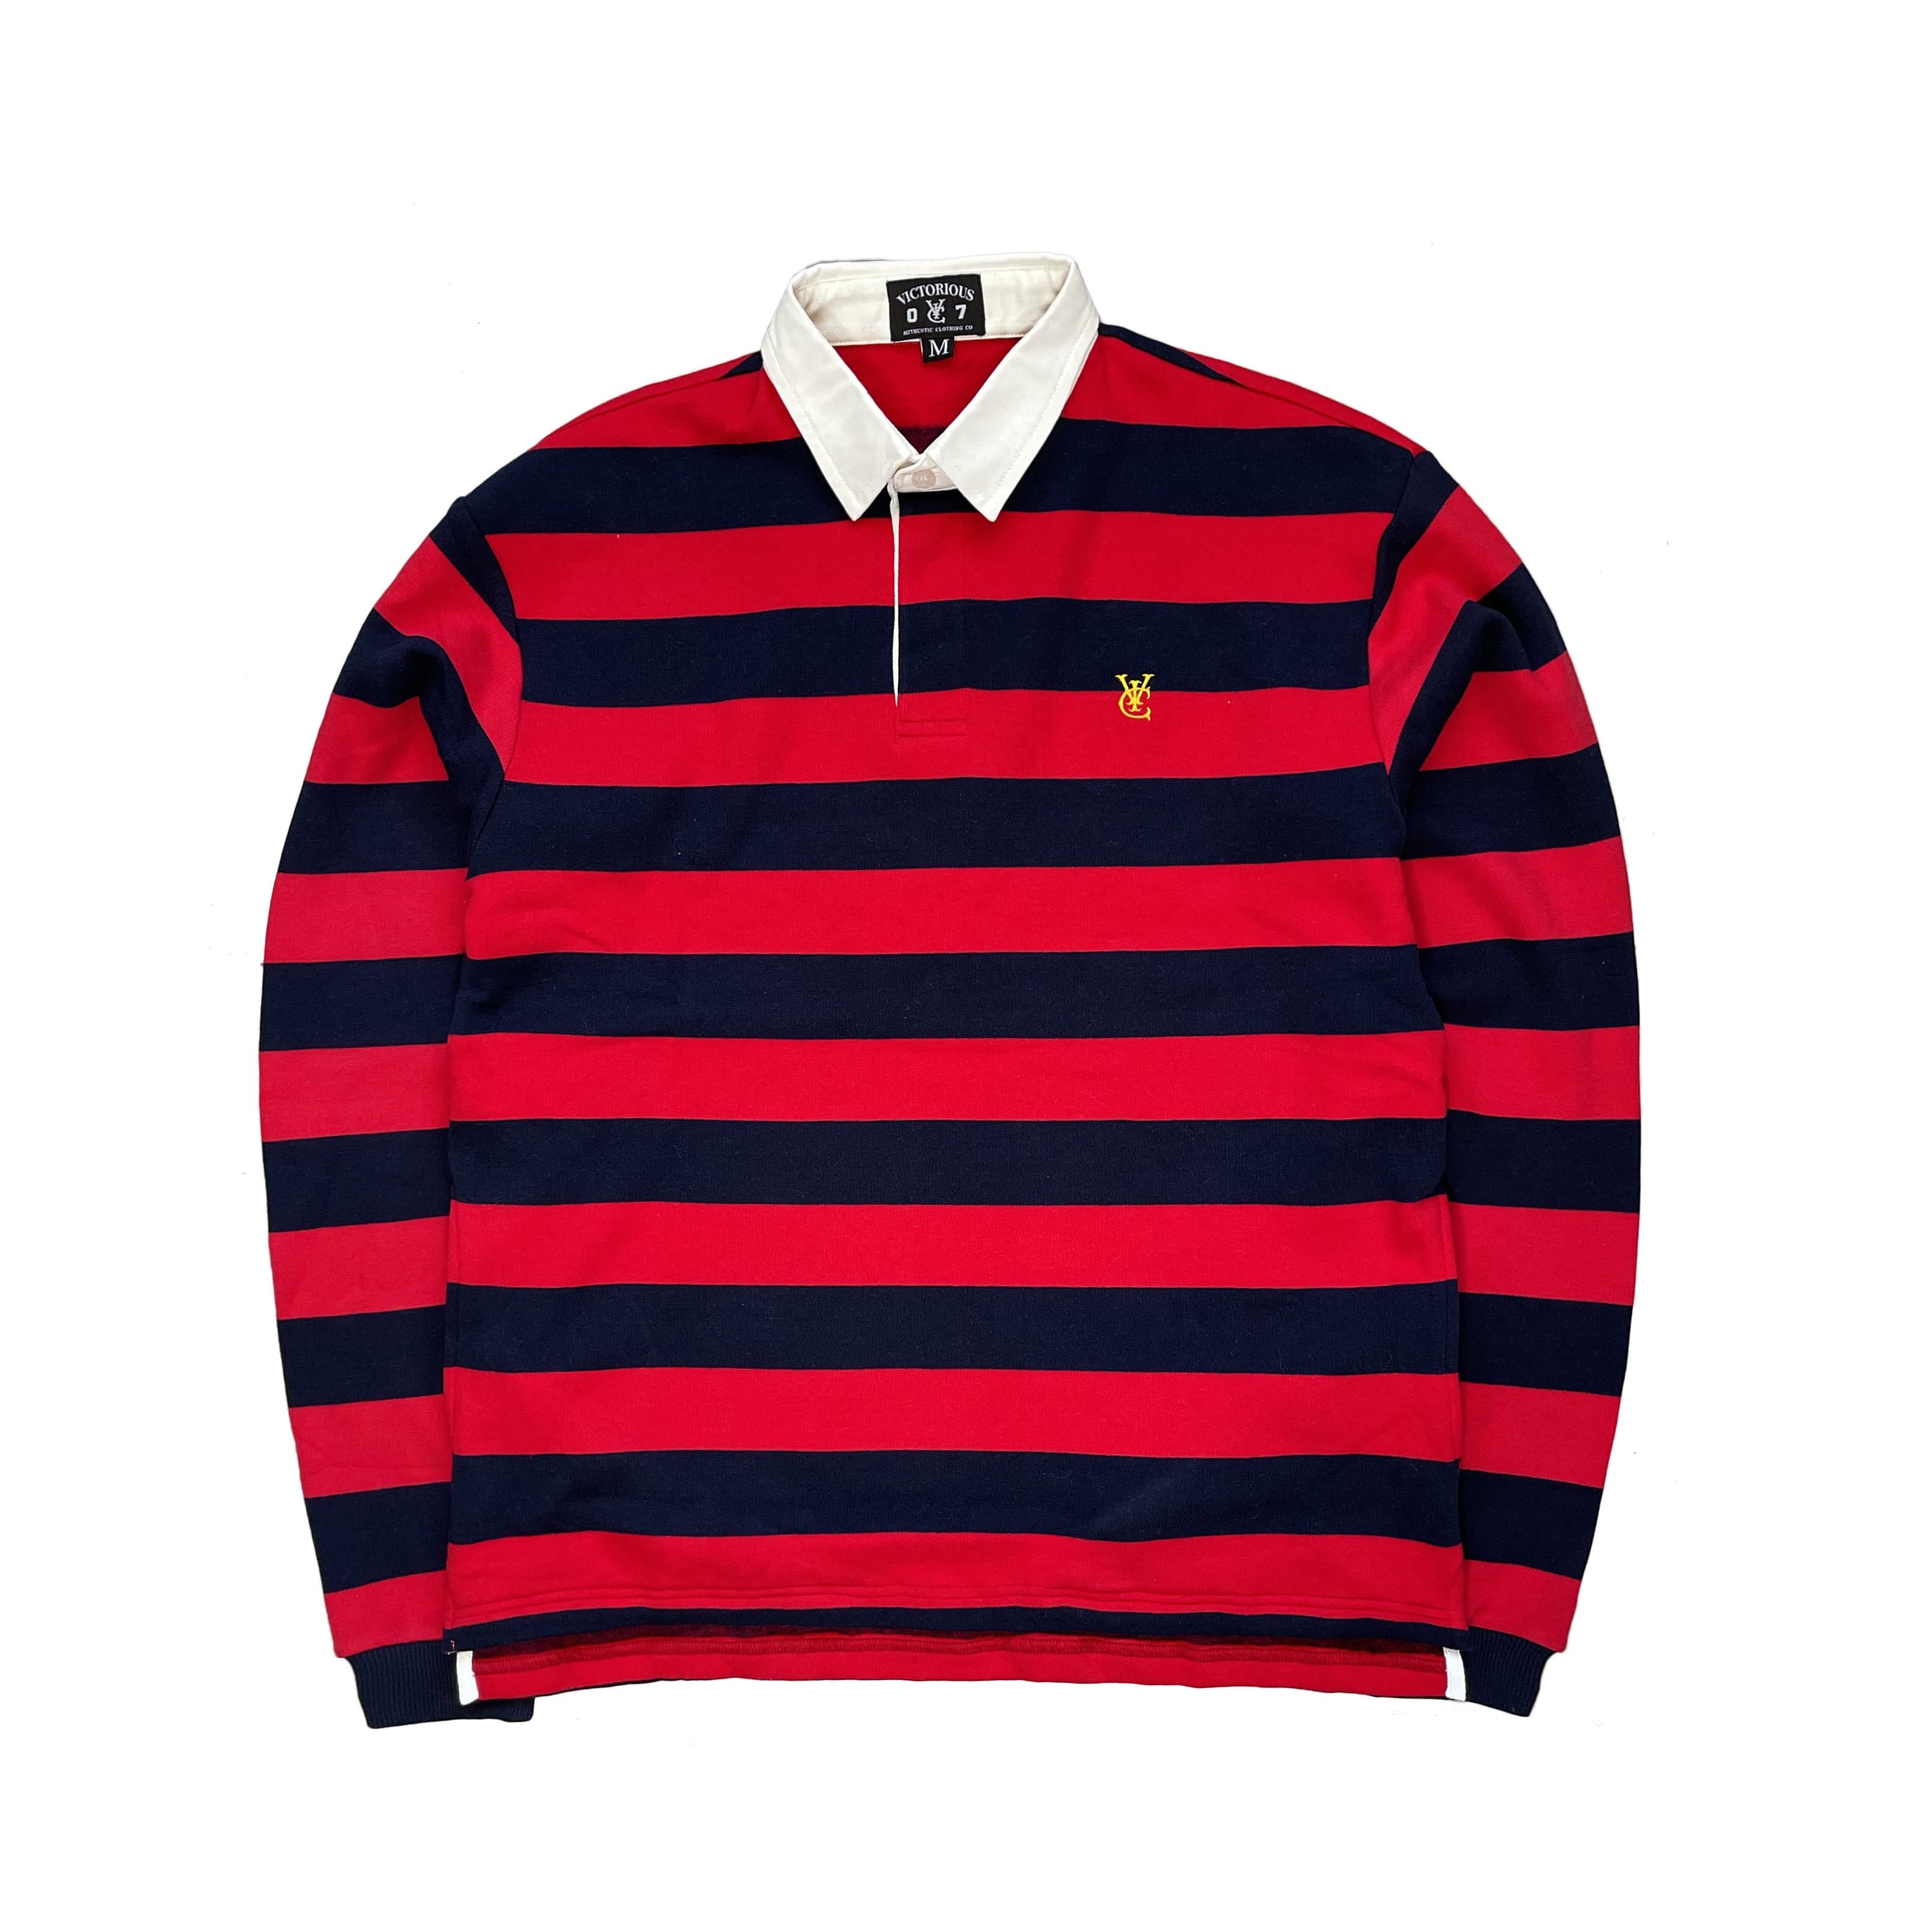 Premium quality stripe rugby polo jersey by New Zealand skate and streetwear clothing label VIC Apparel. Embroidered logo design. 100% Cotton fleece brushed. Relaxed fit, Hidden side pockets, Split seams bottom hem, Extra length at the back. American classic vintage sportswear style. 